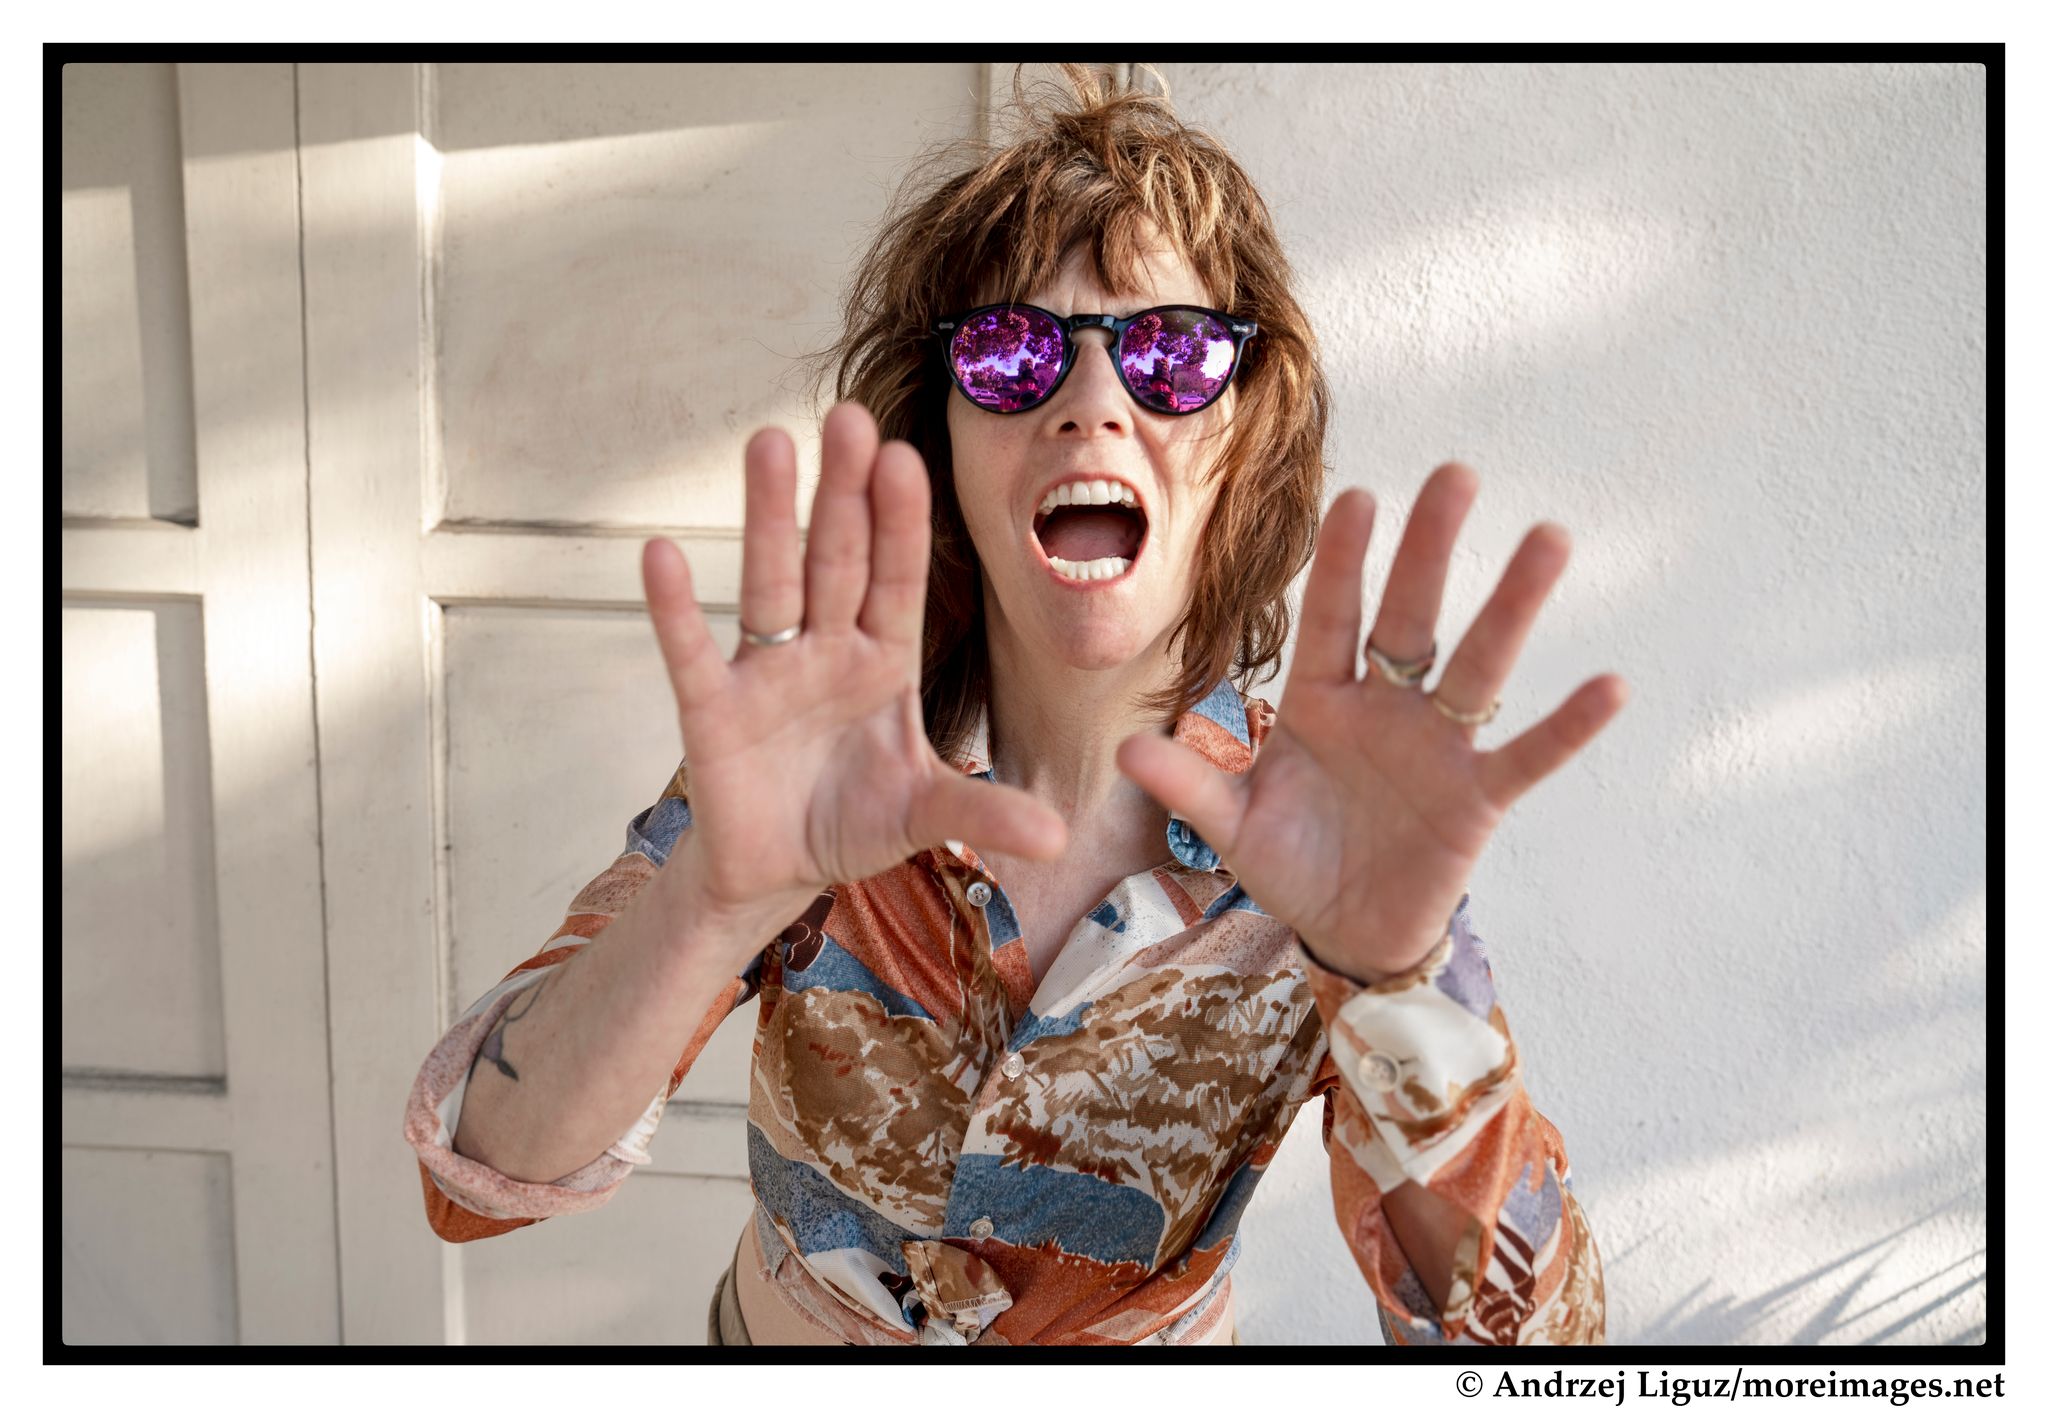 Amelia White portrait in colorful shirt with hands by face as if shouting